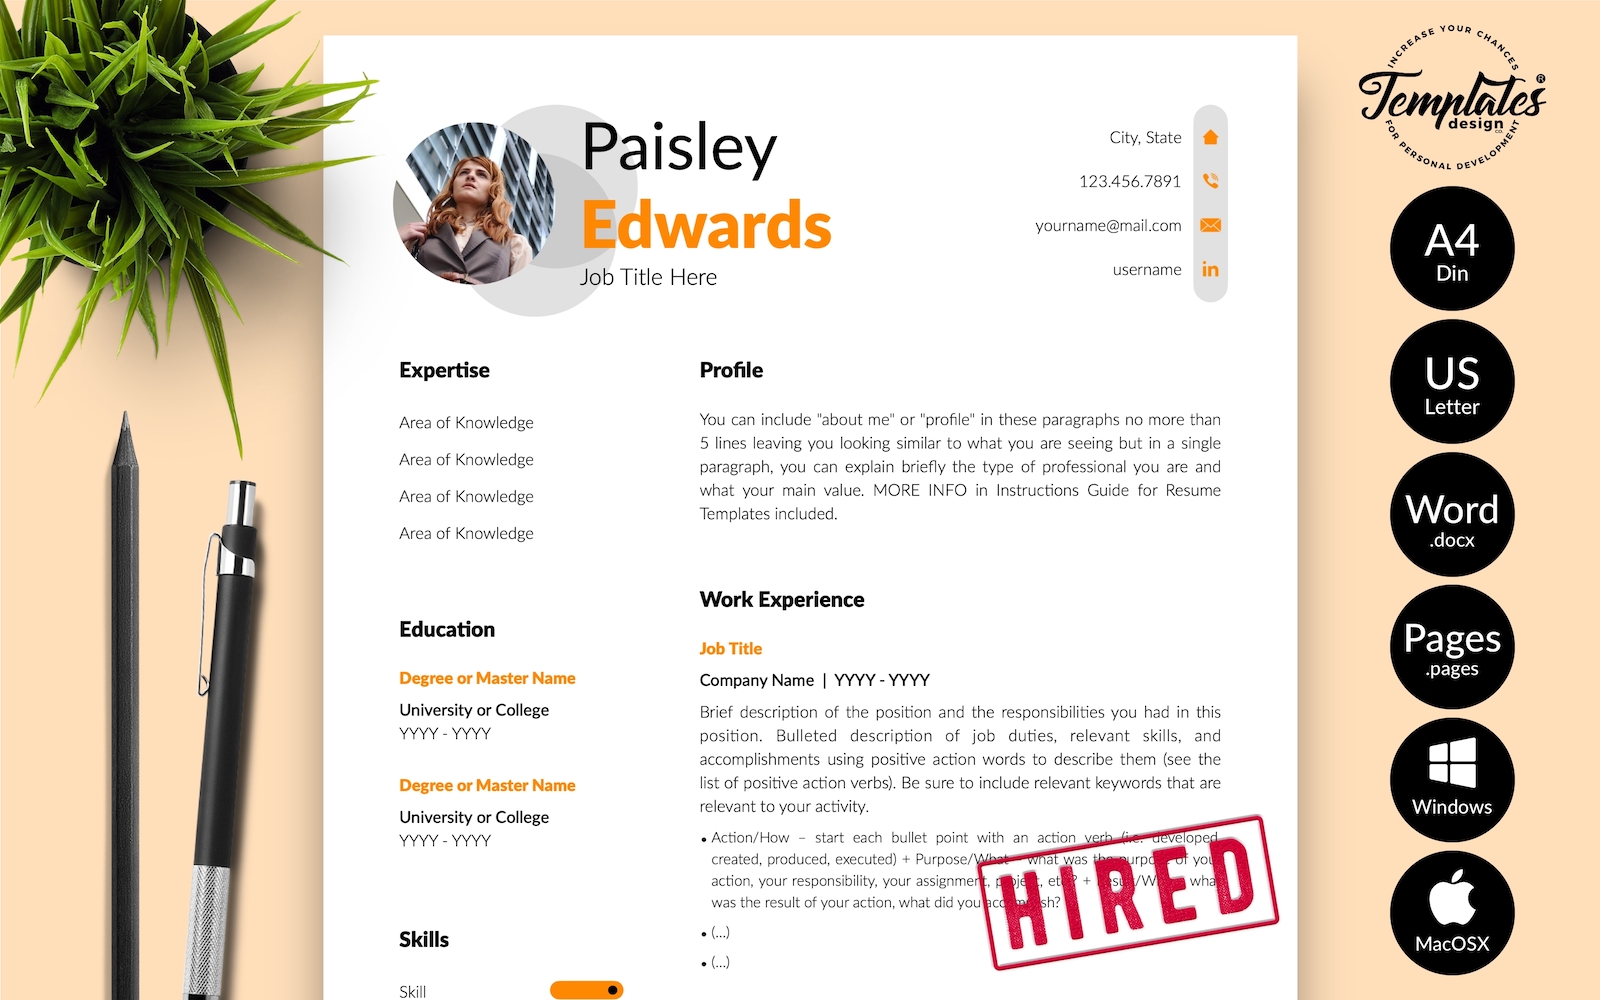 Paisley Edwards - Modern Resume Template with Cover Letter for Microsoft Word & iWork Pages